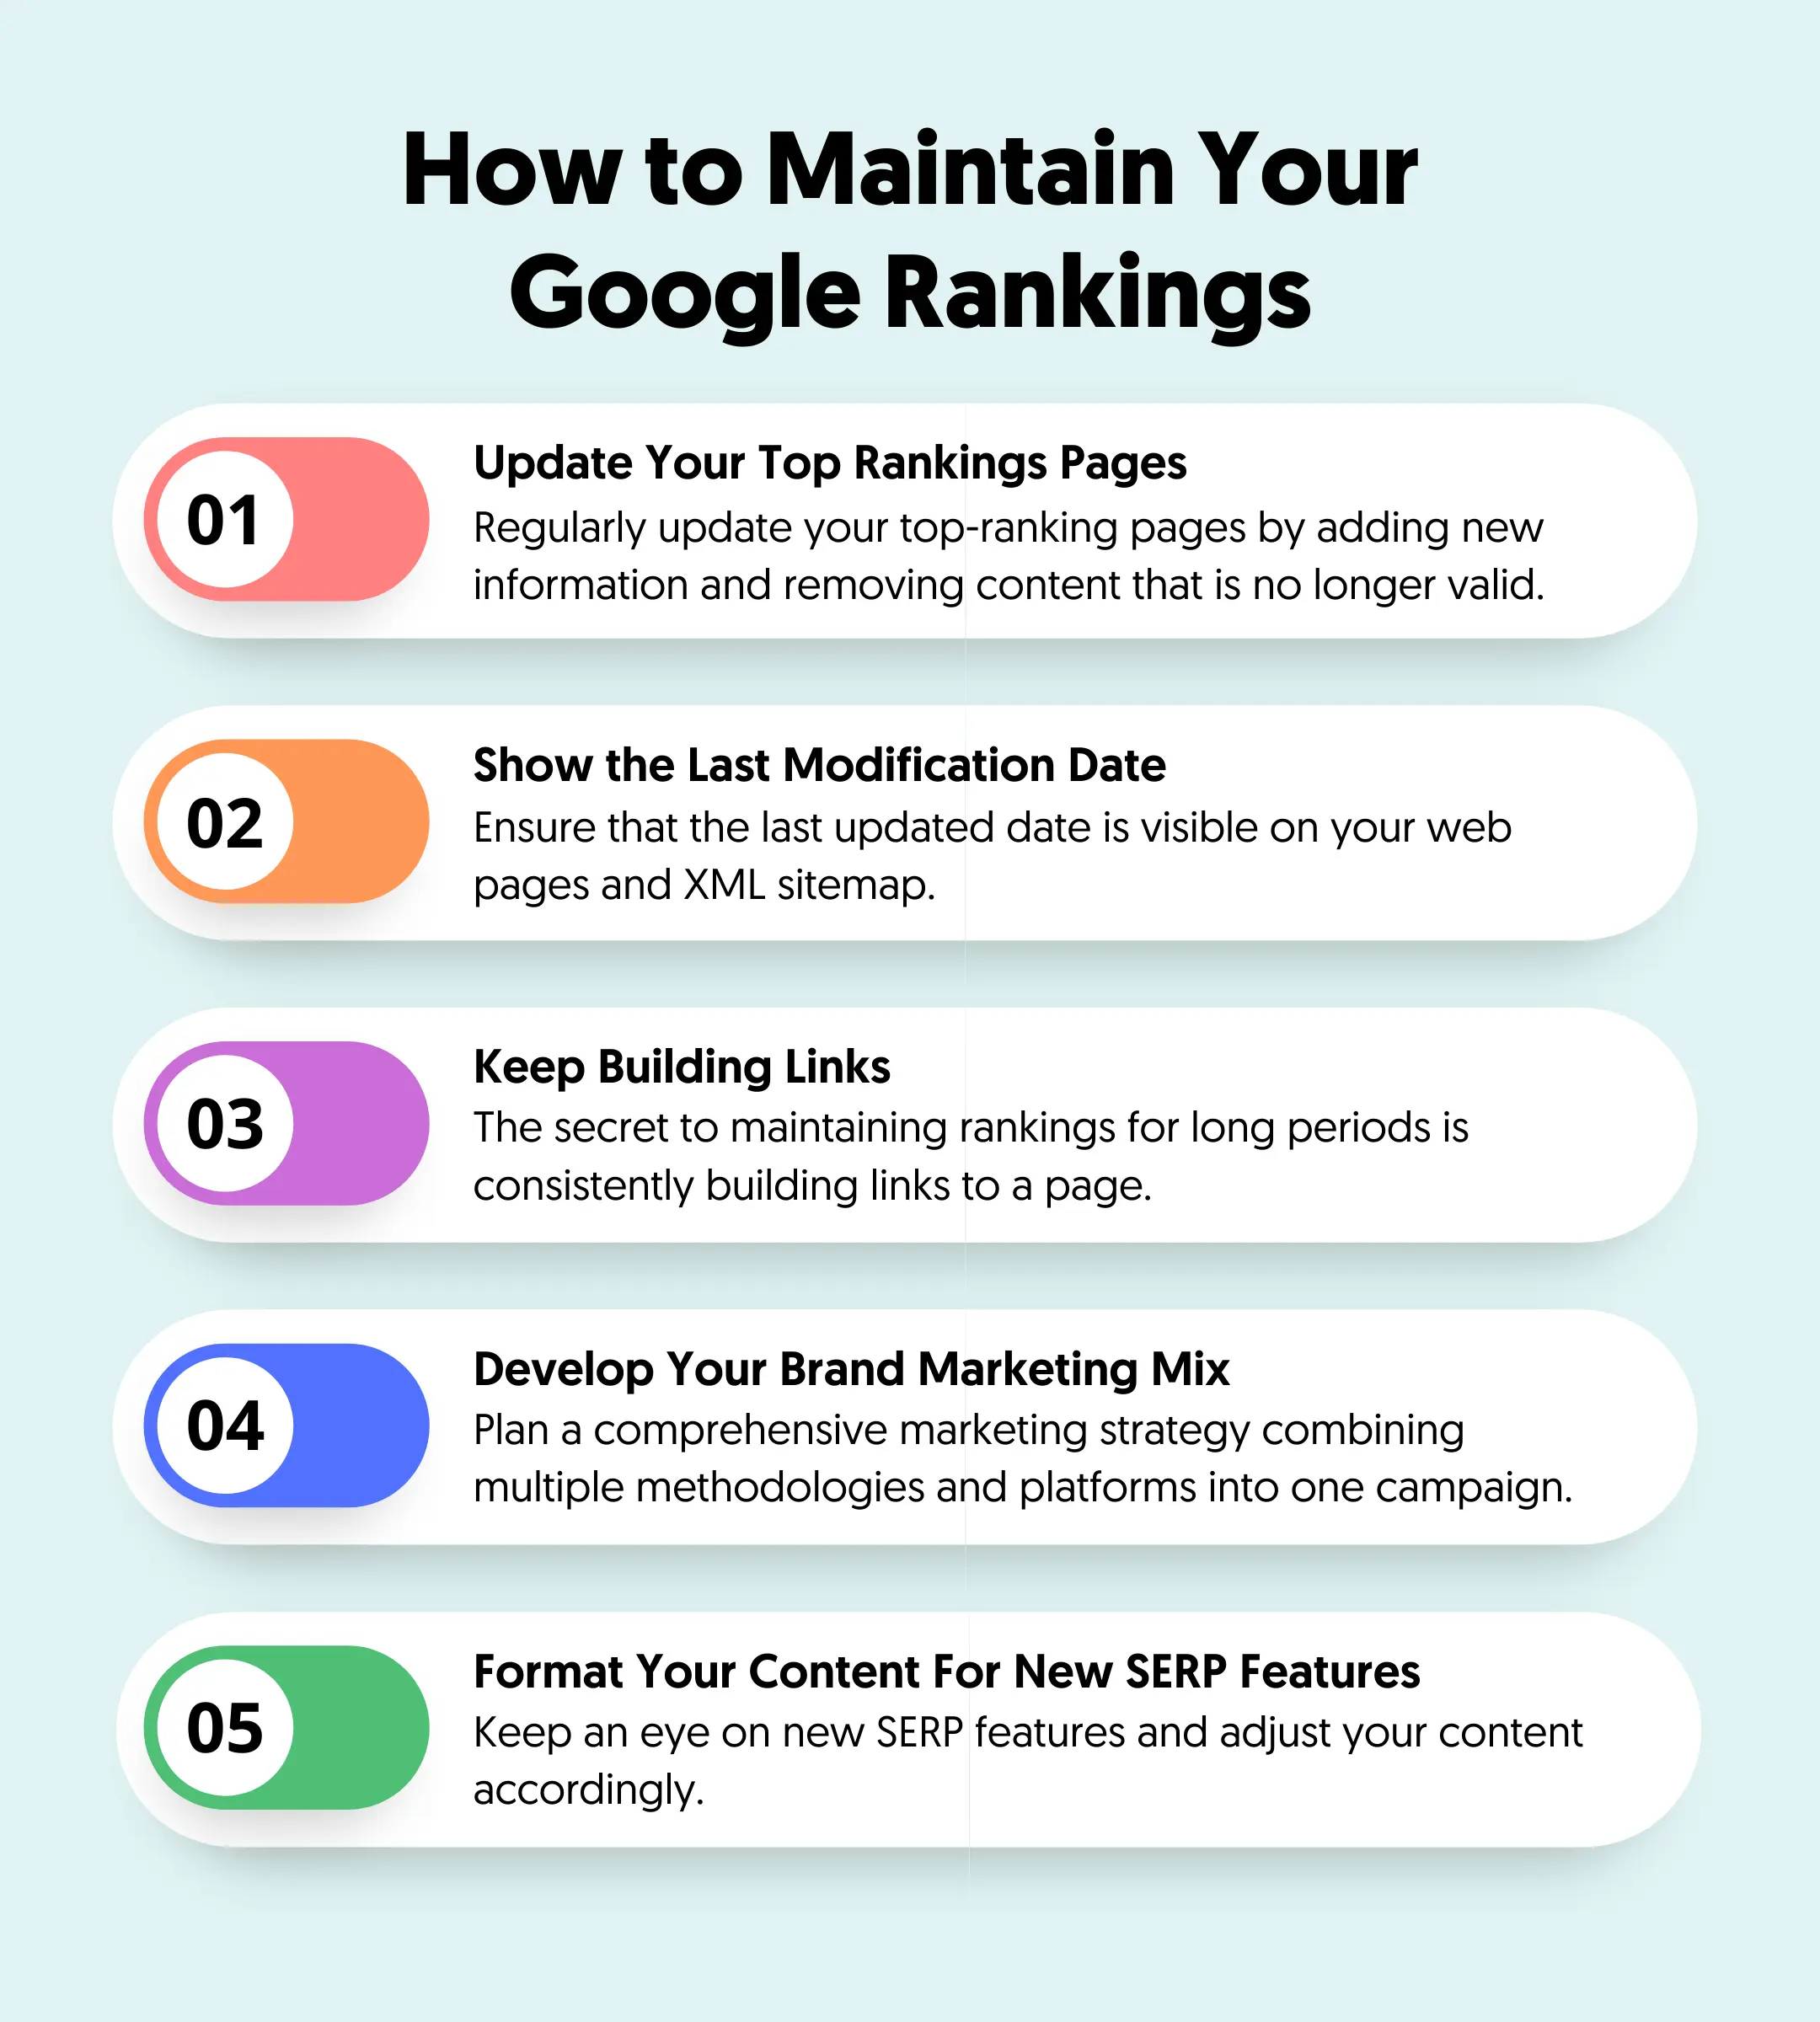 How to Maintain Your Google Rankings